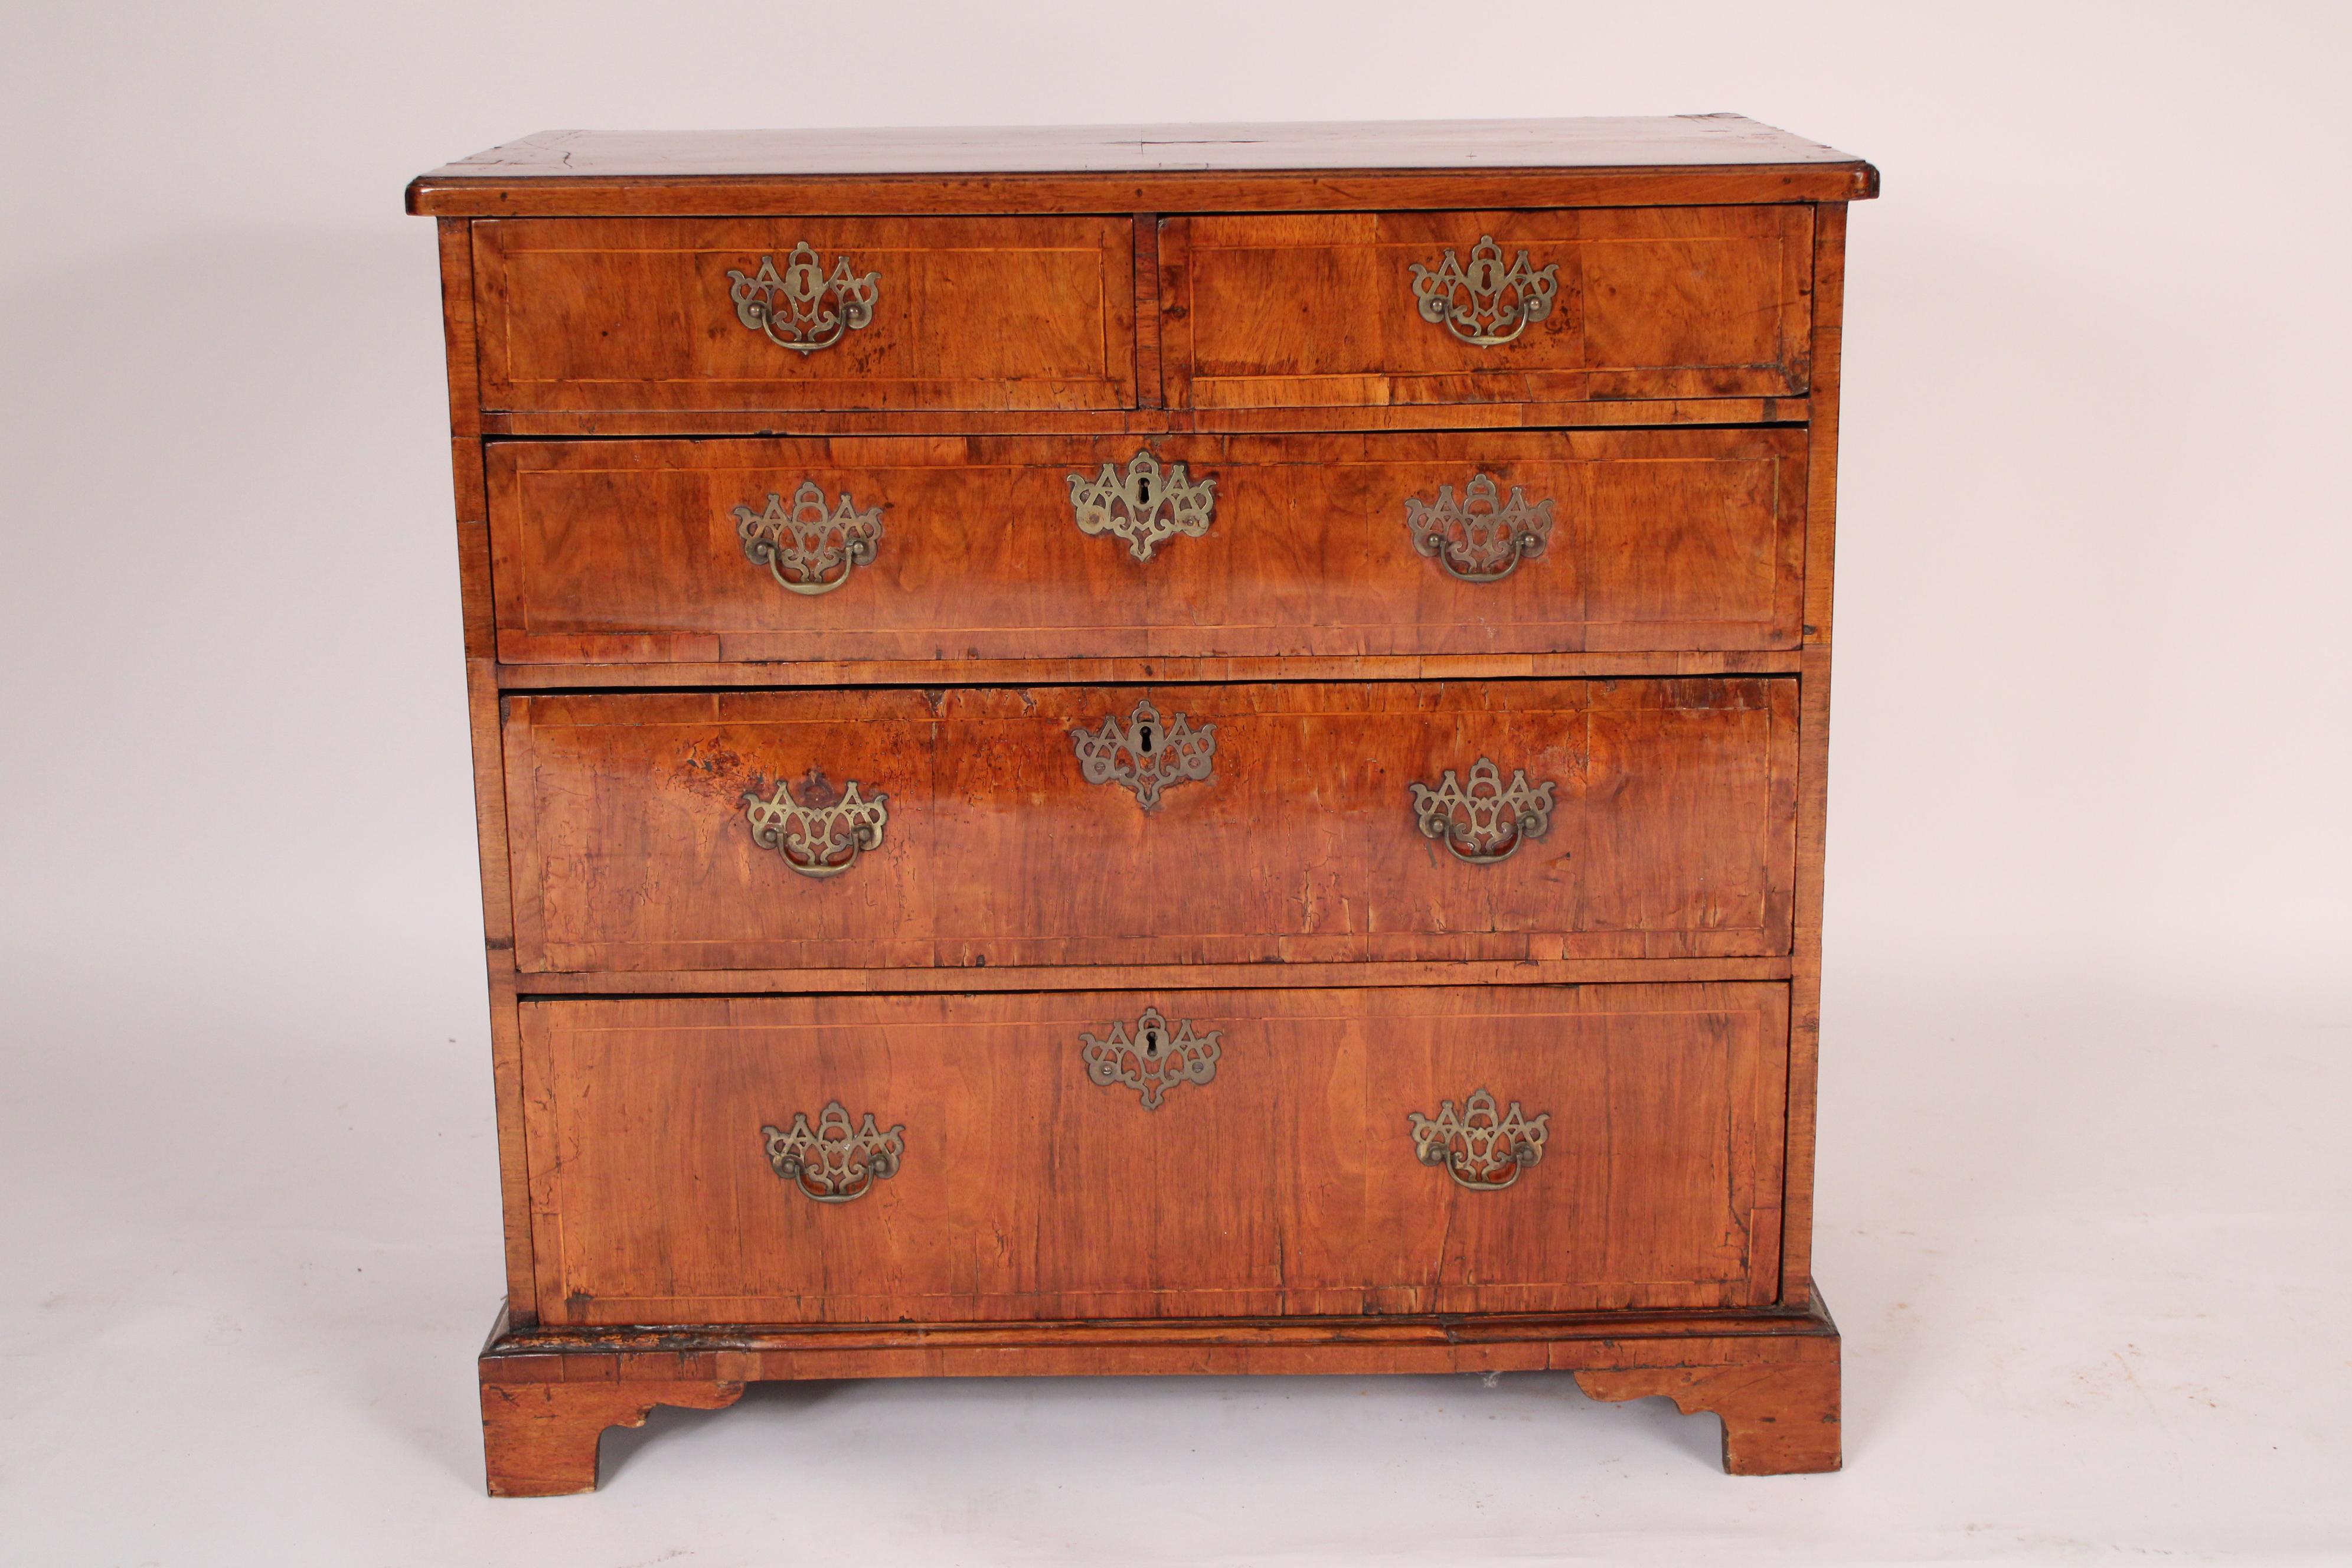 George II walnut chest of drawers, 18th century. With an overhanging rectangular top with two bands of string inlay, two top drawers and 3 graduated lower drawers all with string inlay, resting on bracket feet. 